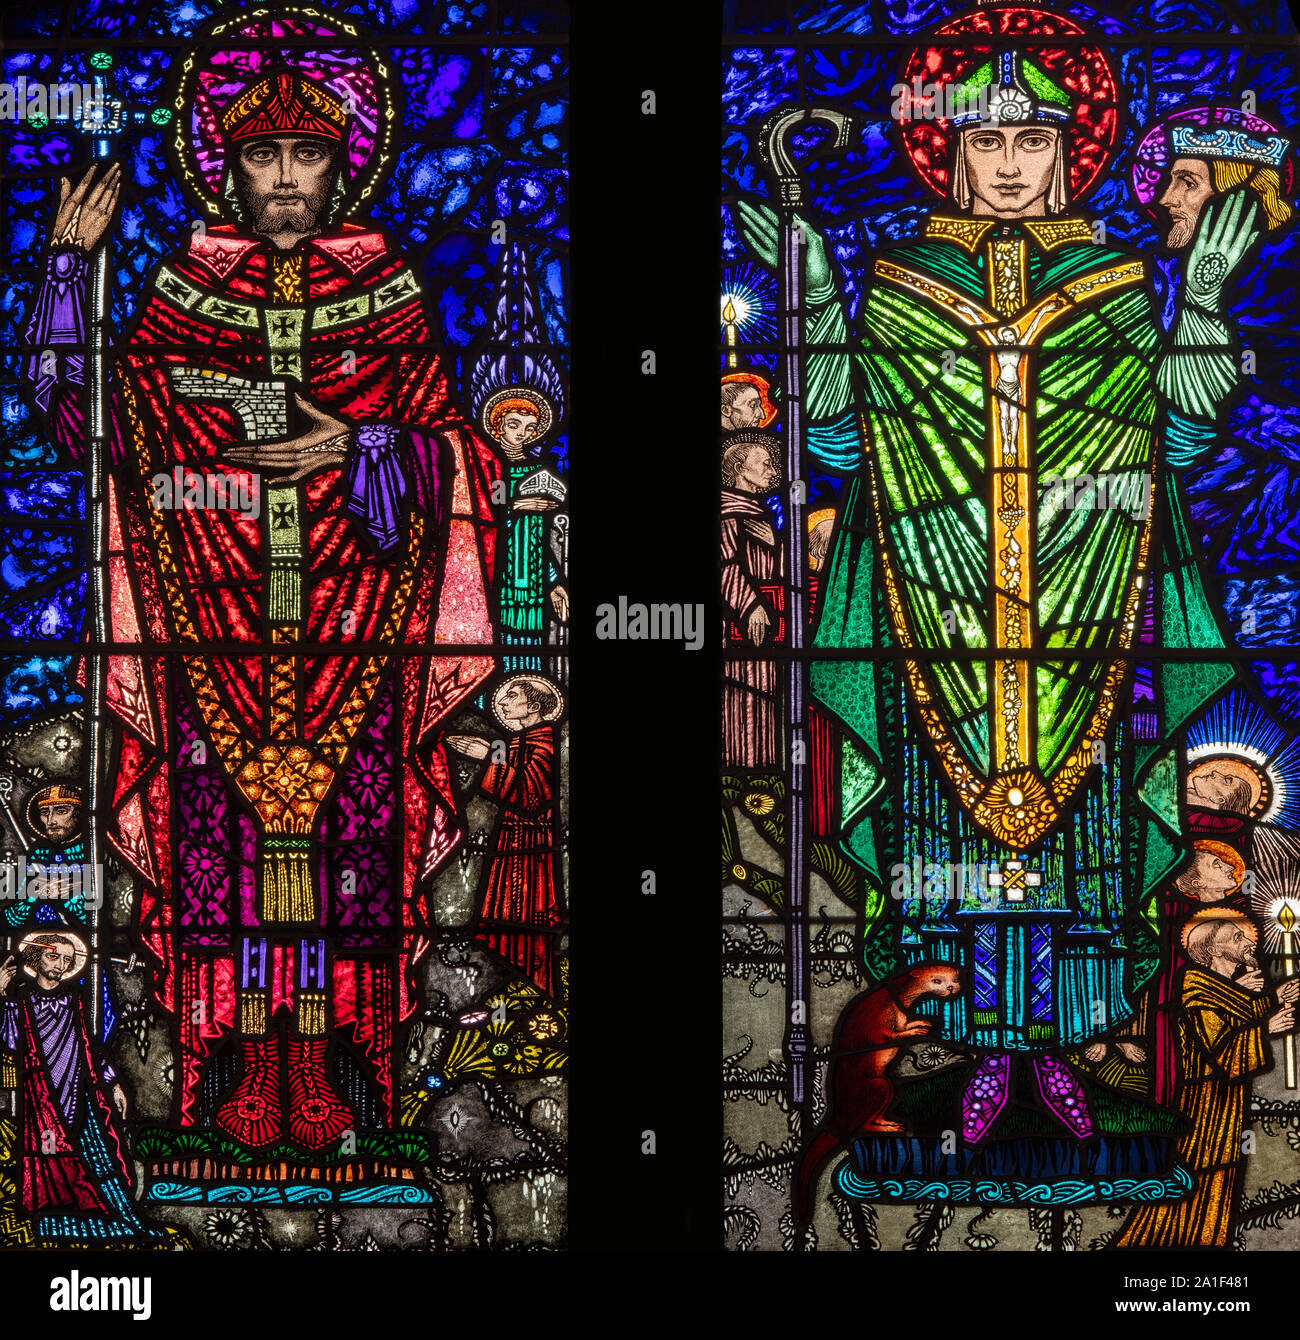 William of York, and St. Cuthbert, depicted in jewel-like colours by the Harry Clarke Studios, 1931, St. Cuthbert's Church, Old Elvet, Co. Durham. UK Stock Photo